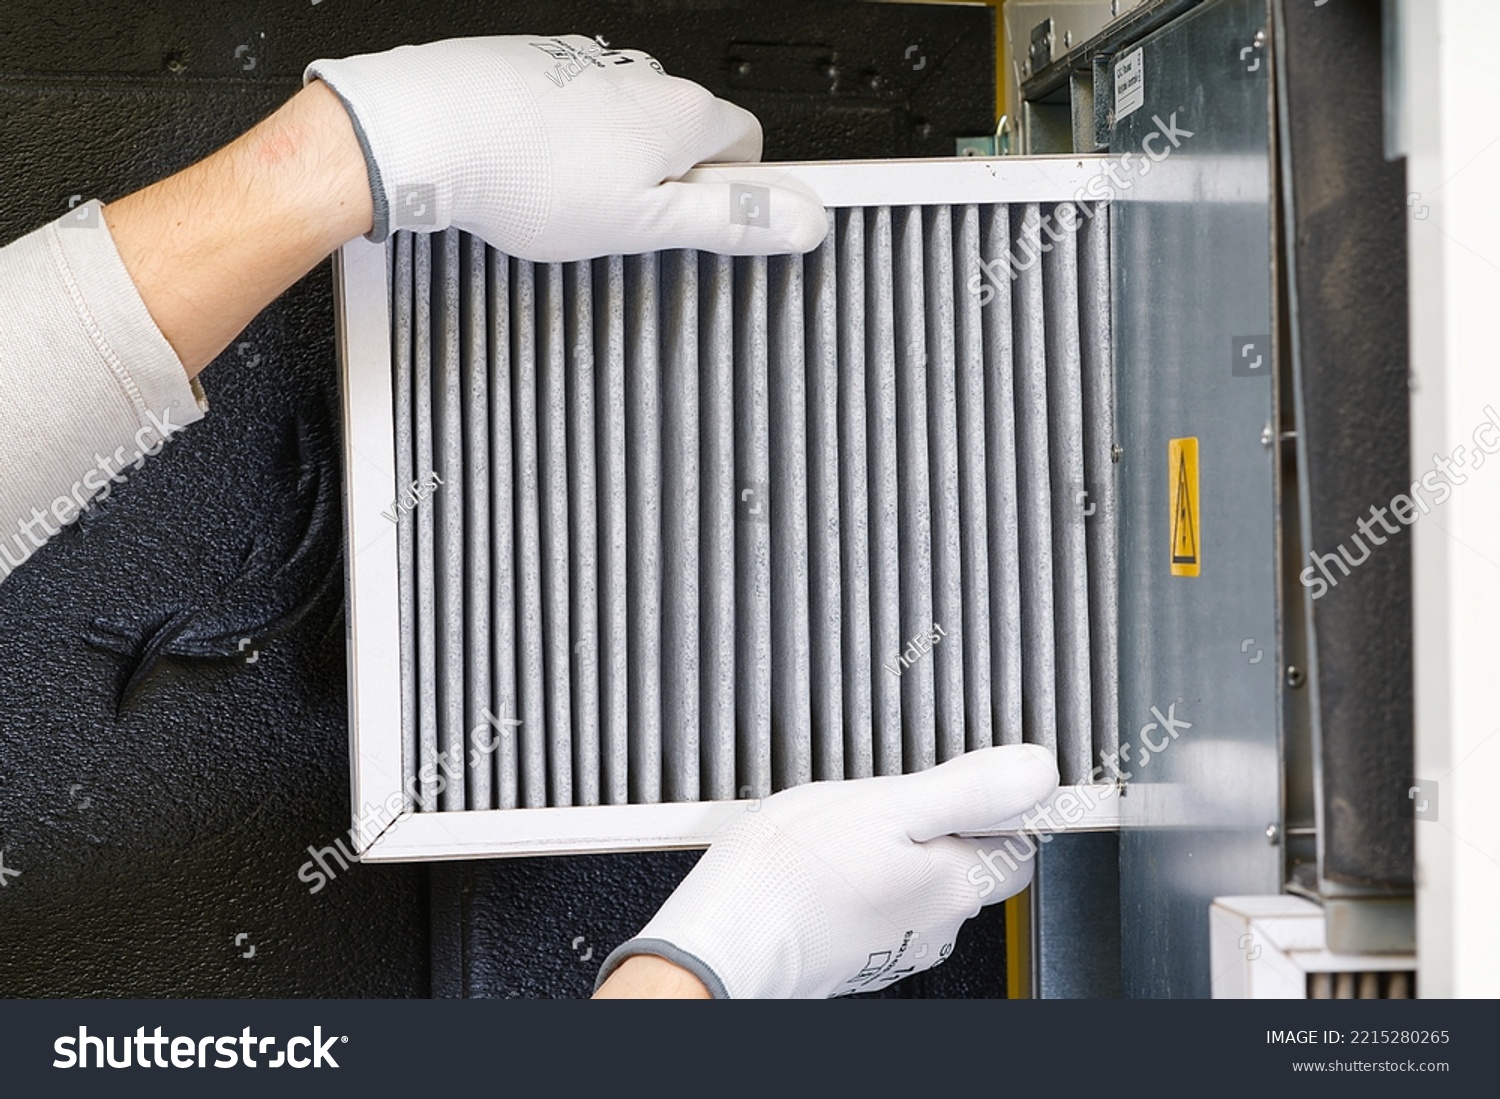 hvac filter replacing. Replacing the filter in the central ventilation system, furnace. Replacing Dirty Air filter for home central air conditioning system. Change filter in rotary heat exchanger #2215280265